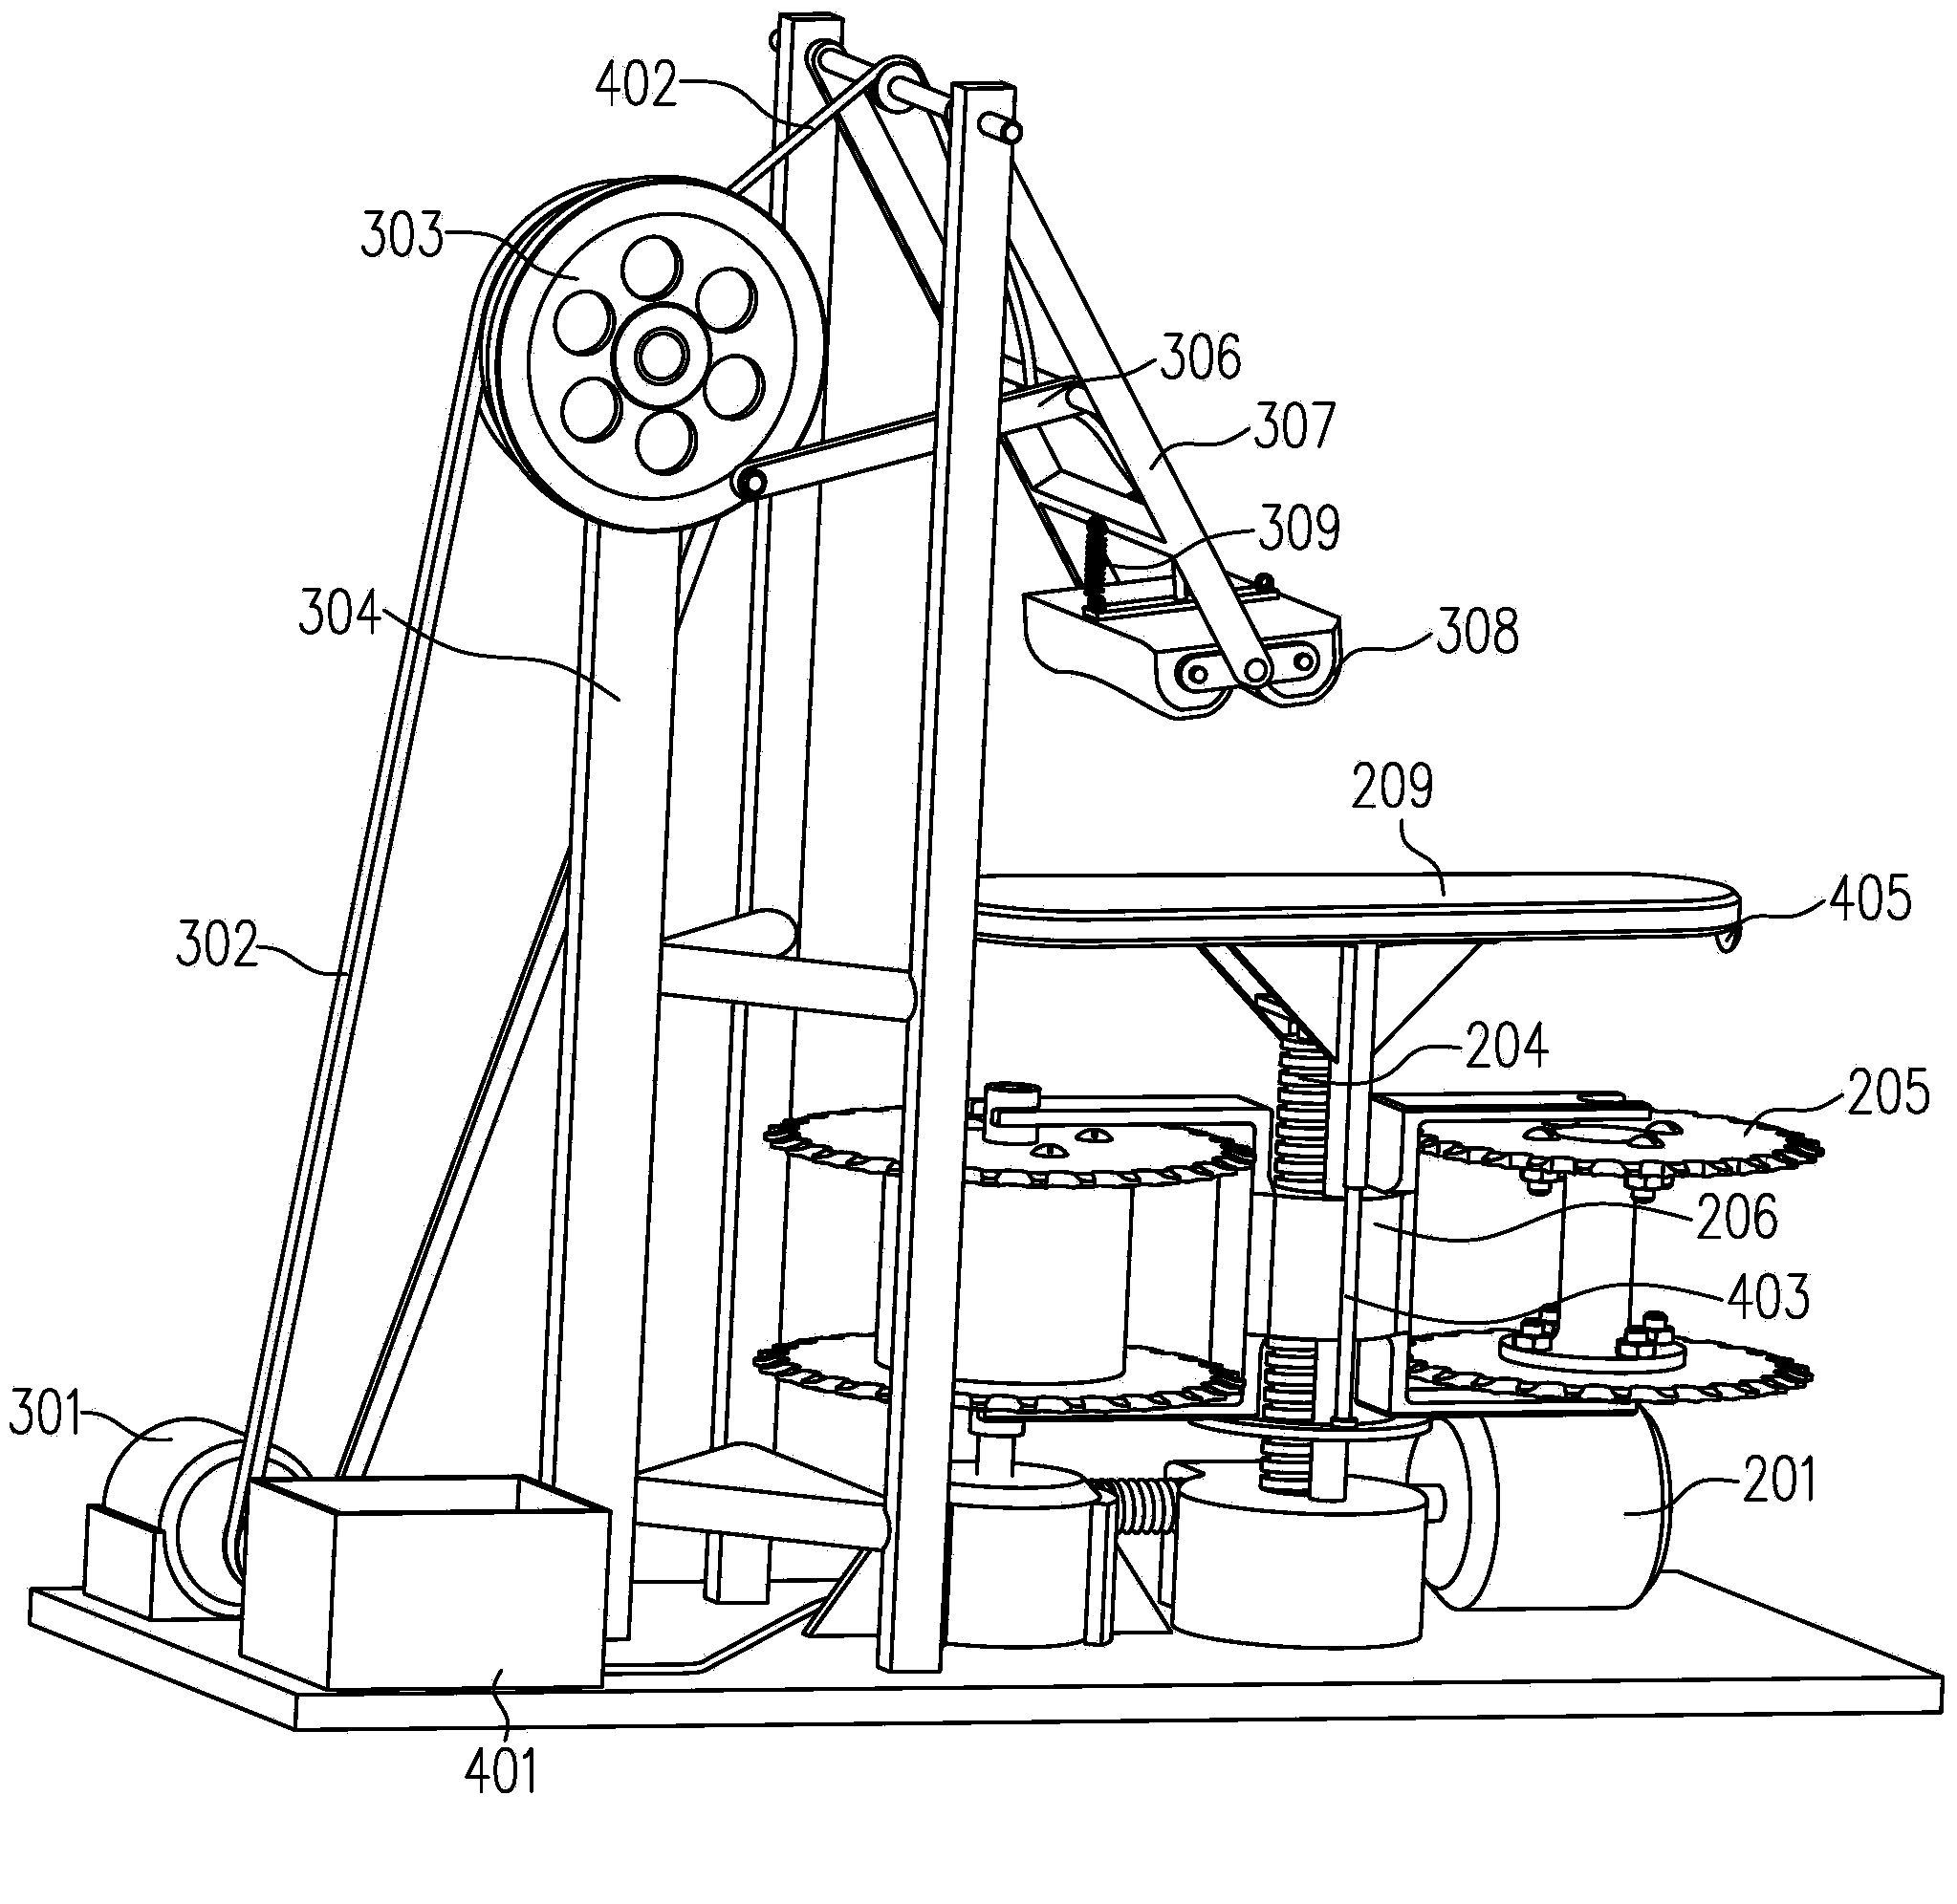 Full-automatic shoe-cleaning machine